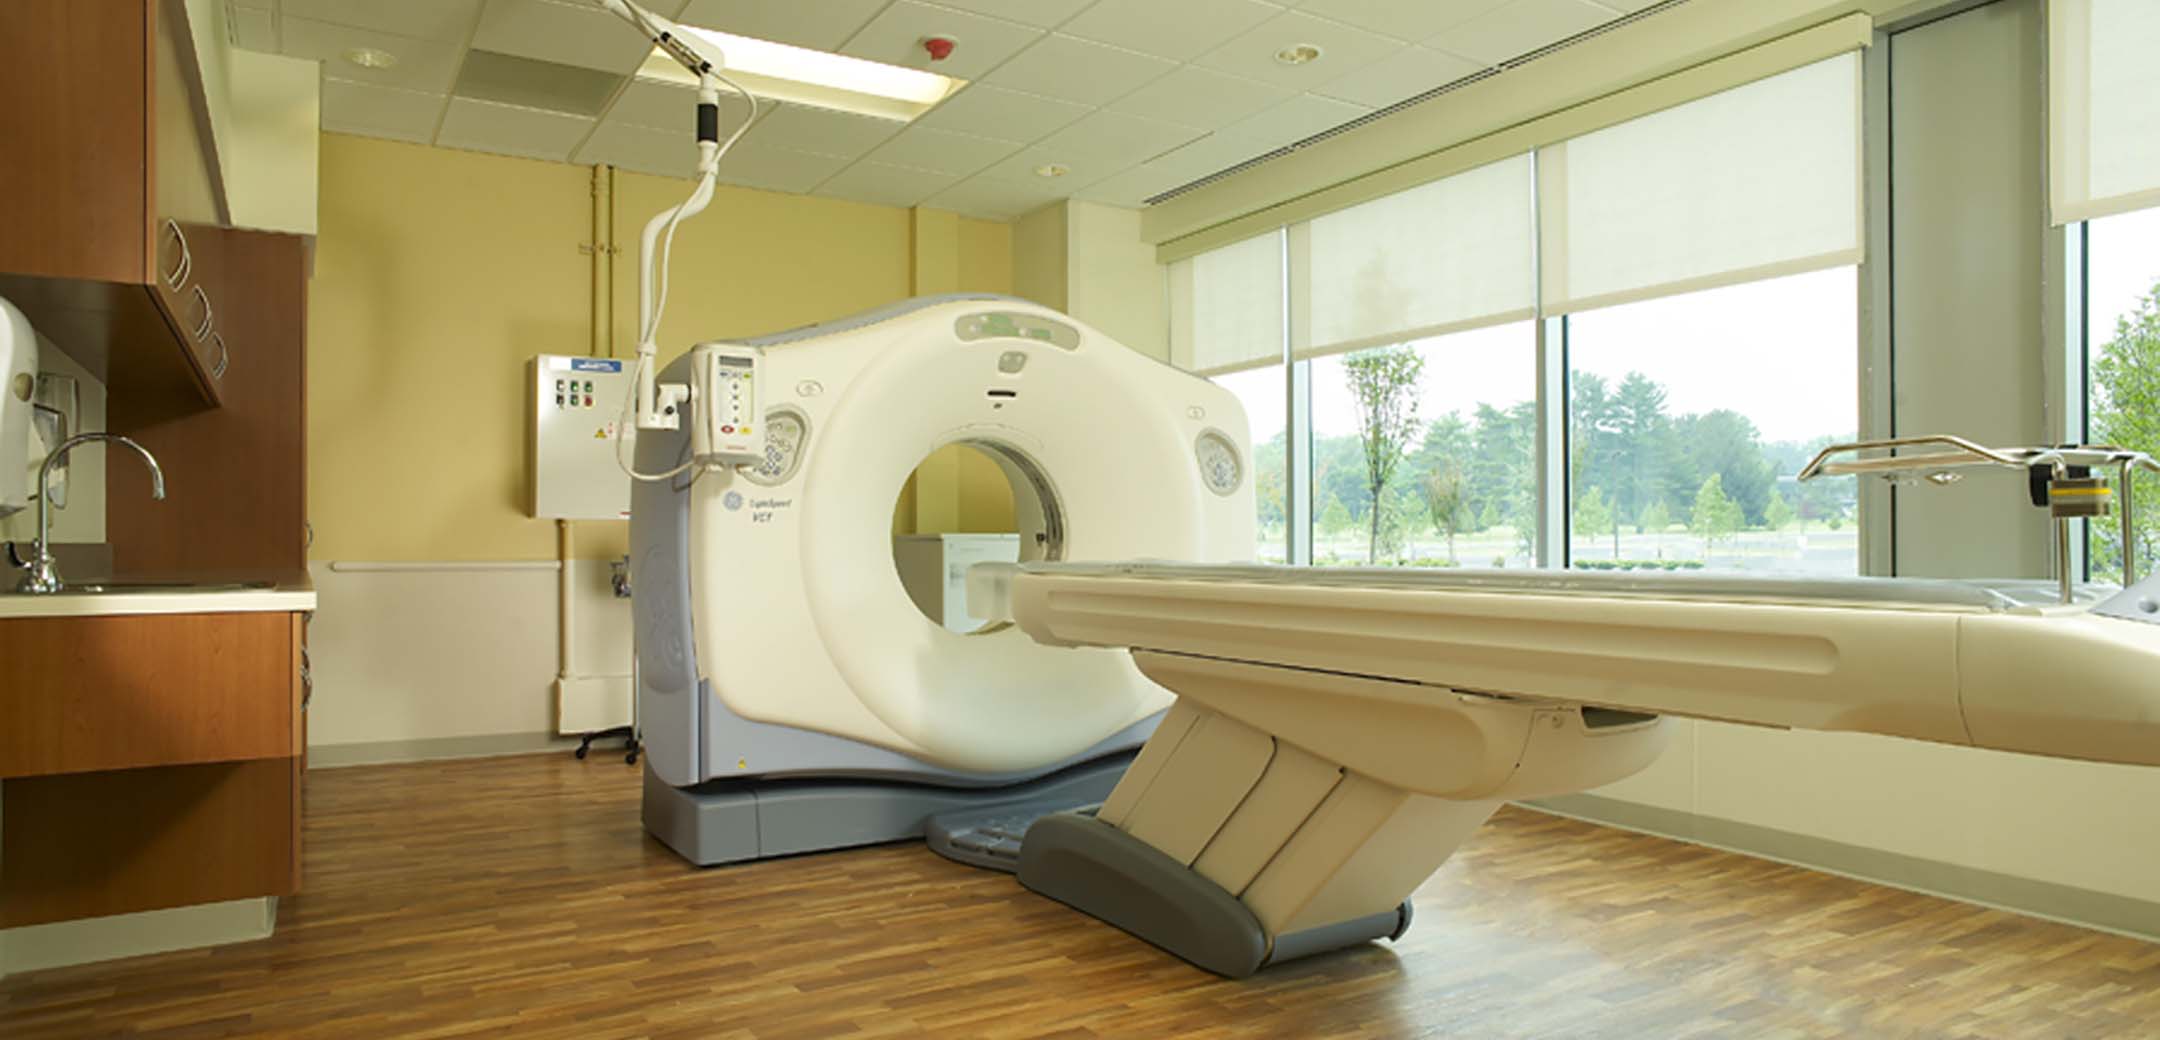 An interior view of the Main Line Health hospital room showcasing the wood flooring and CAT scan machine inside the room.